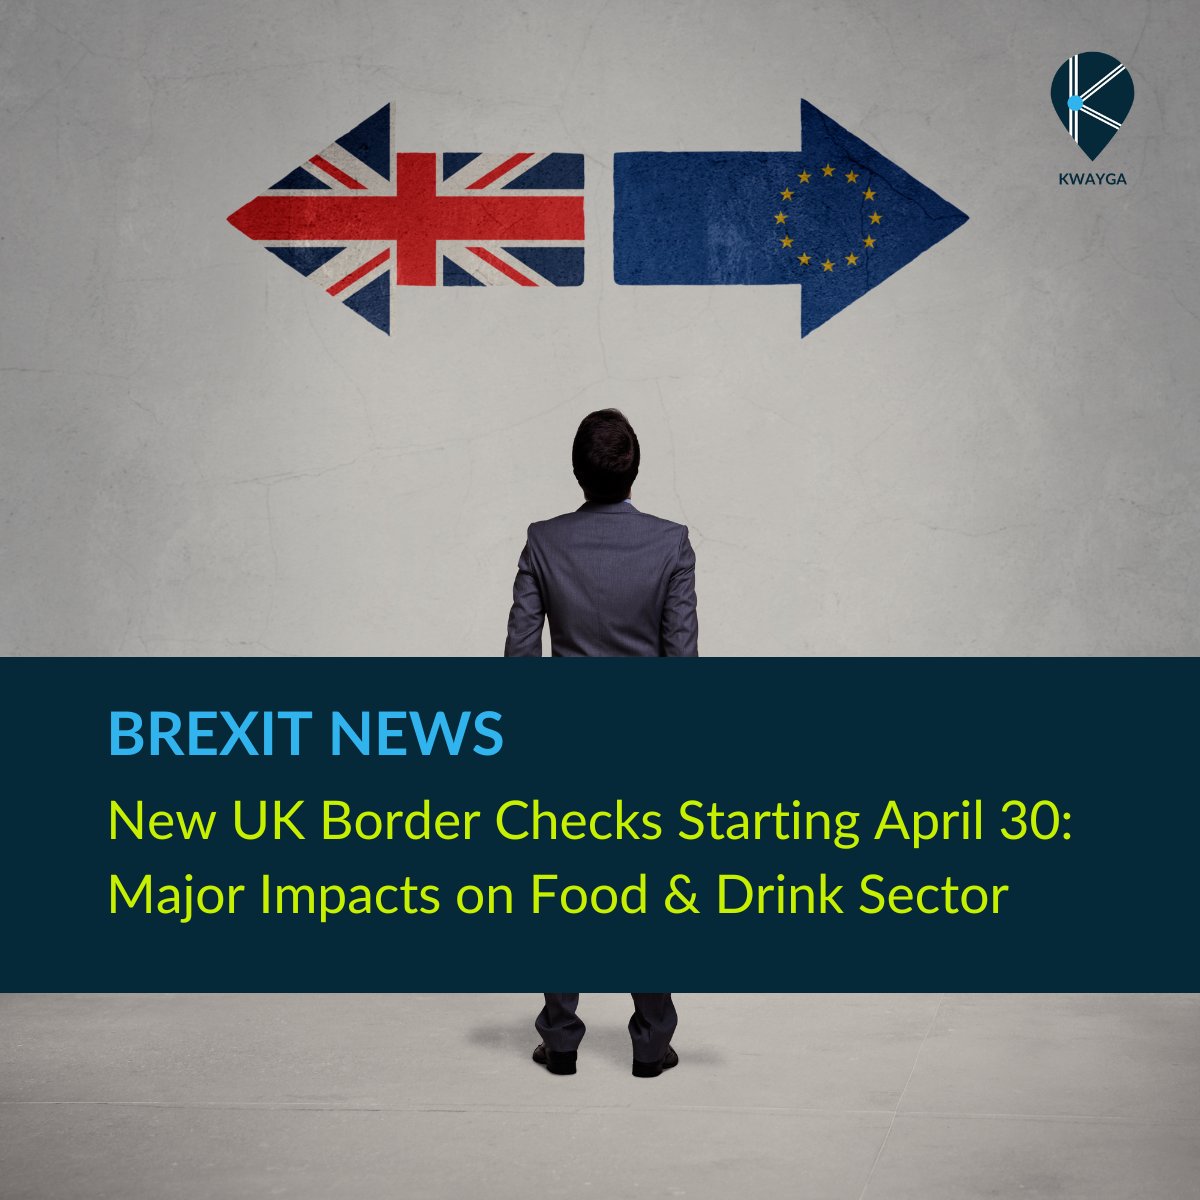 What strategies is your #supermarket implementing to navigate the challenges posed by #Brexit? As the new border checks are implemented, #UK importers are warning of great potential for #food shortages and a substantial increase in operational costs, estimated to reach £2bn.